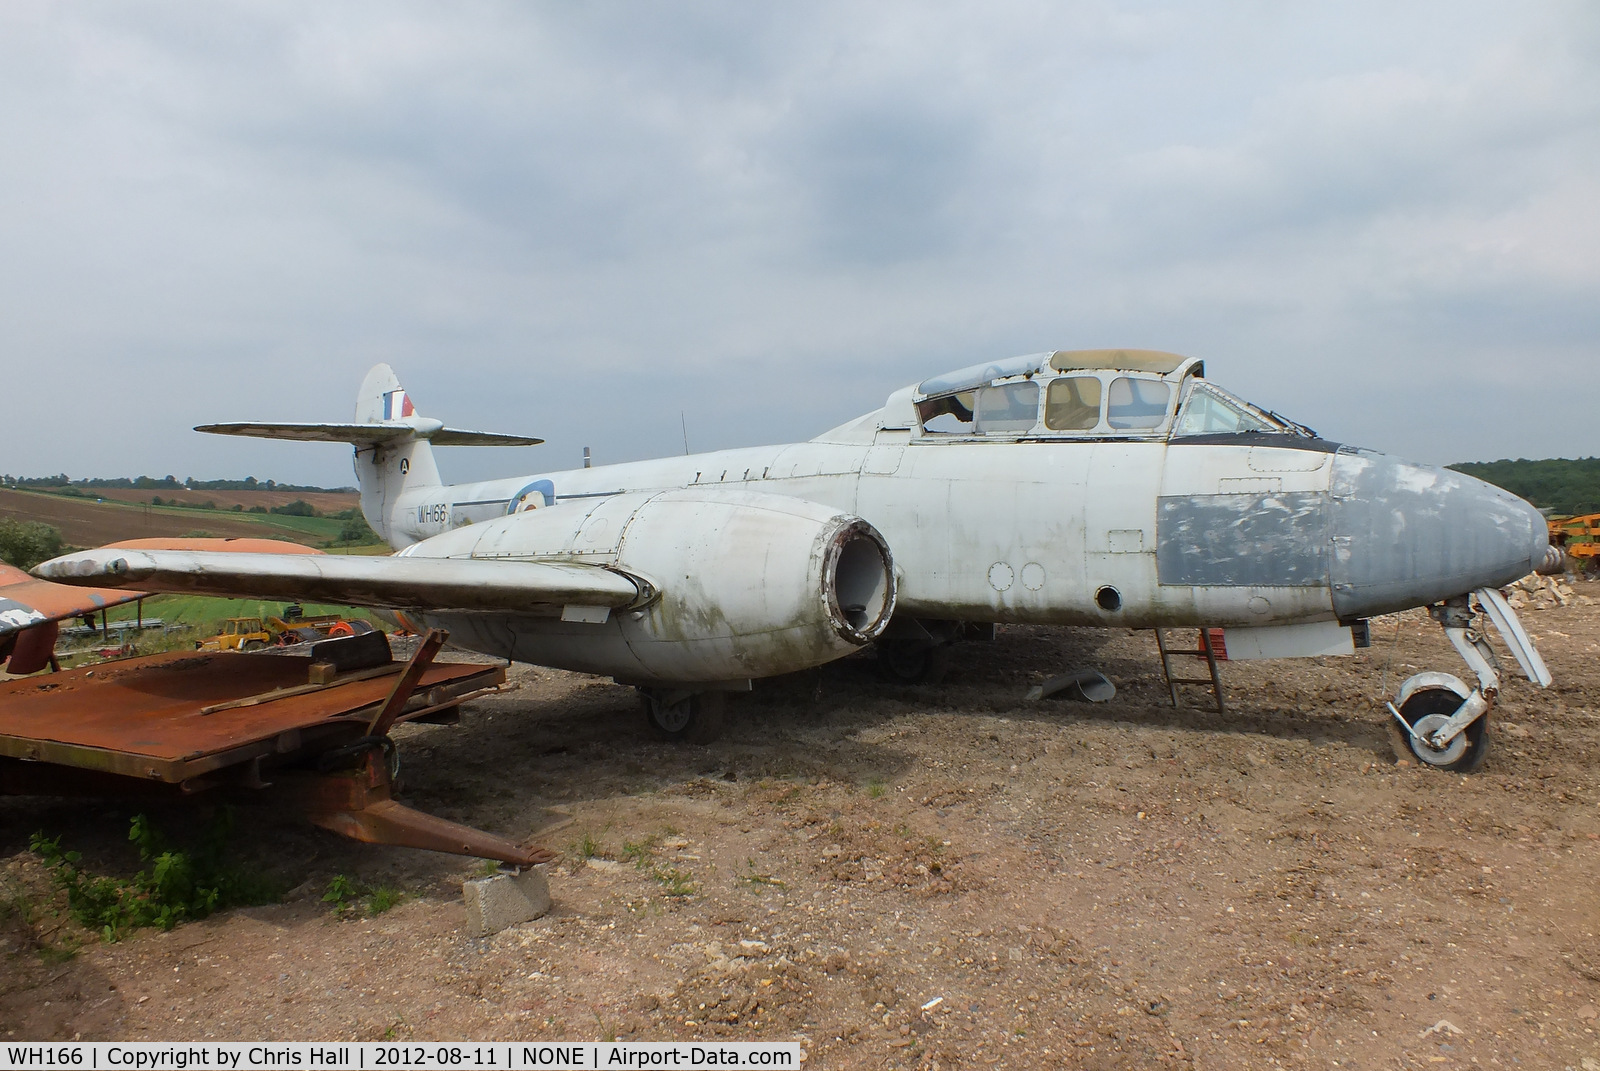 WH166, 1952 Gloster Meteor T.7 C/N not found WH166, part of a private collection on a farm in Pershore, Worcestershire